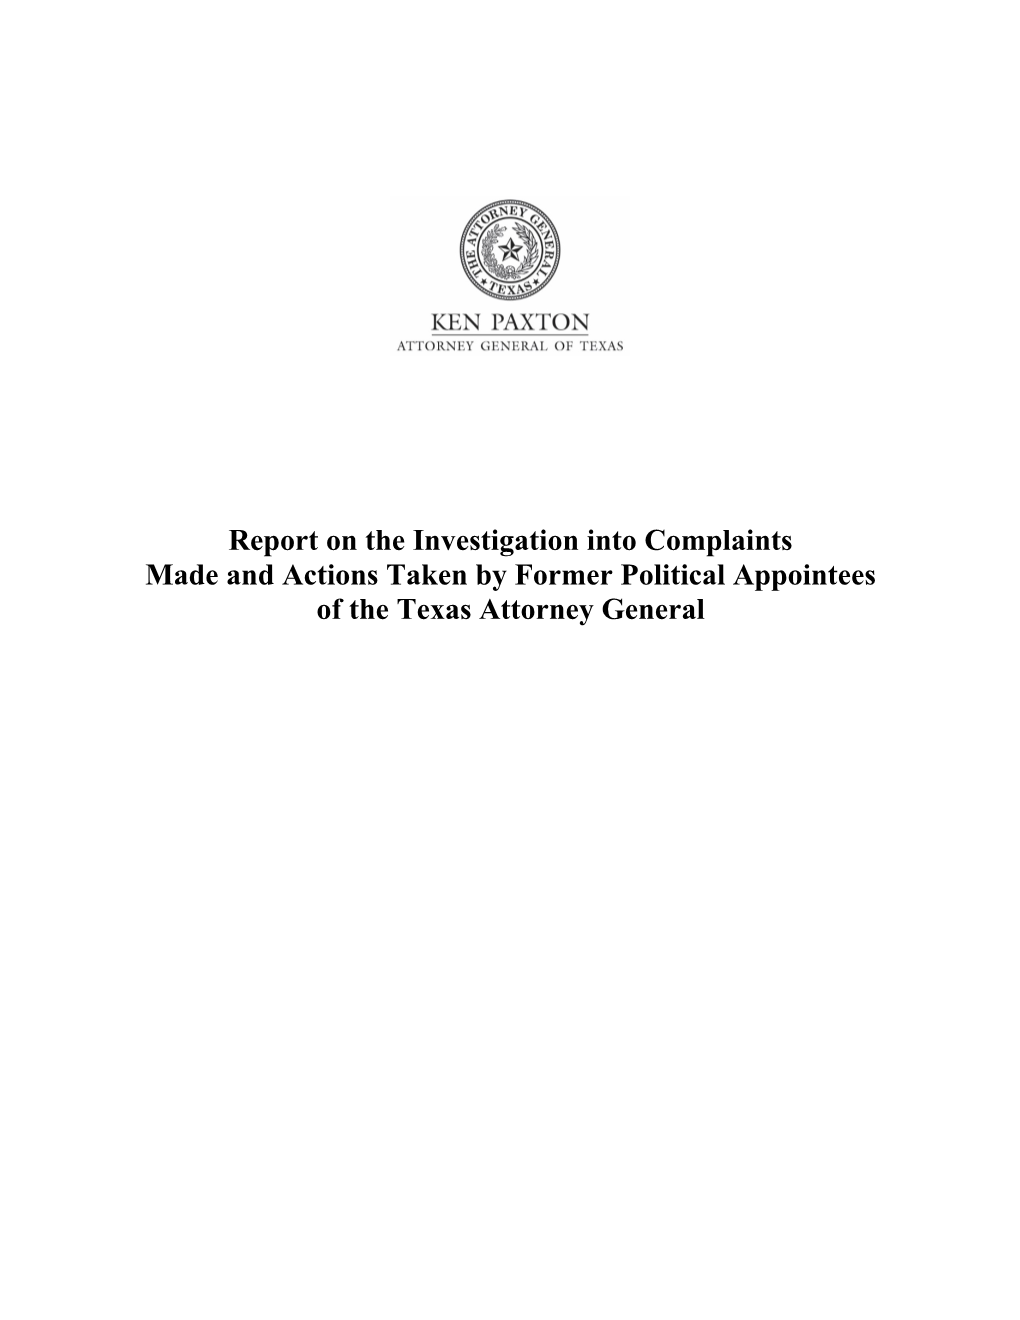 Report on the Investigation Into Complaints Made and Actions Taken by Former Political Appointees of the Texas Attorney General